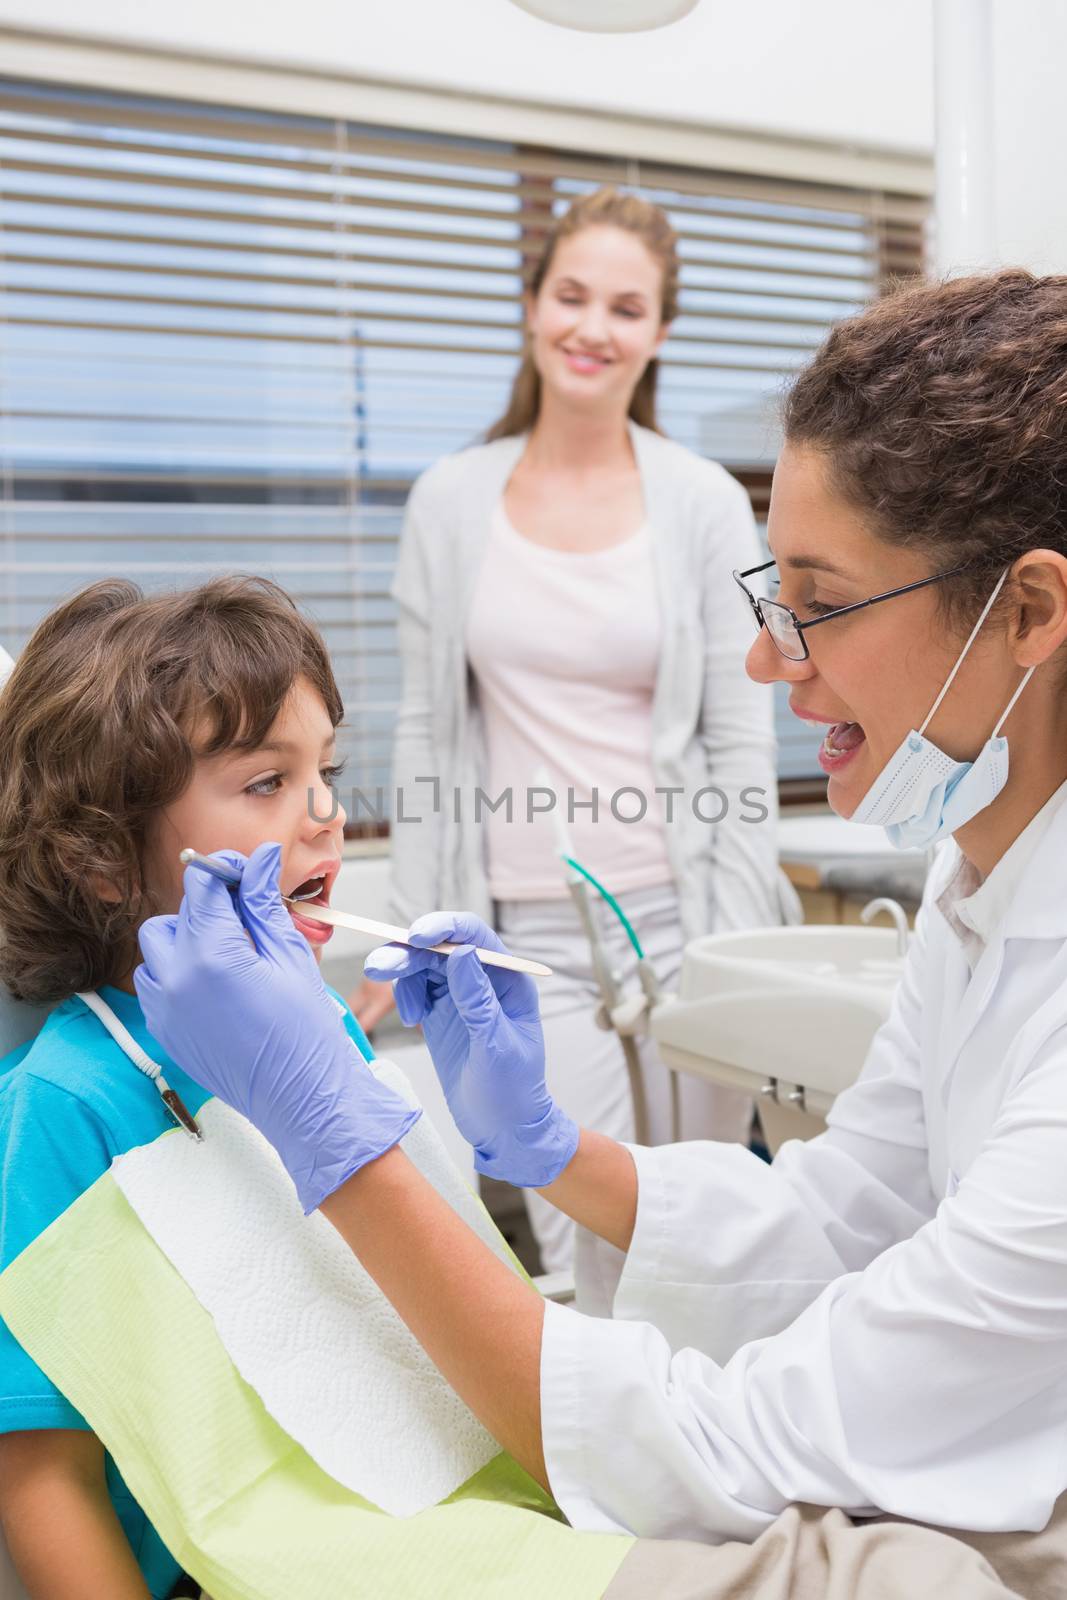 Pediatric dentist examining a little boys teeth with his mother watching at the dental clinic